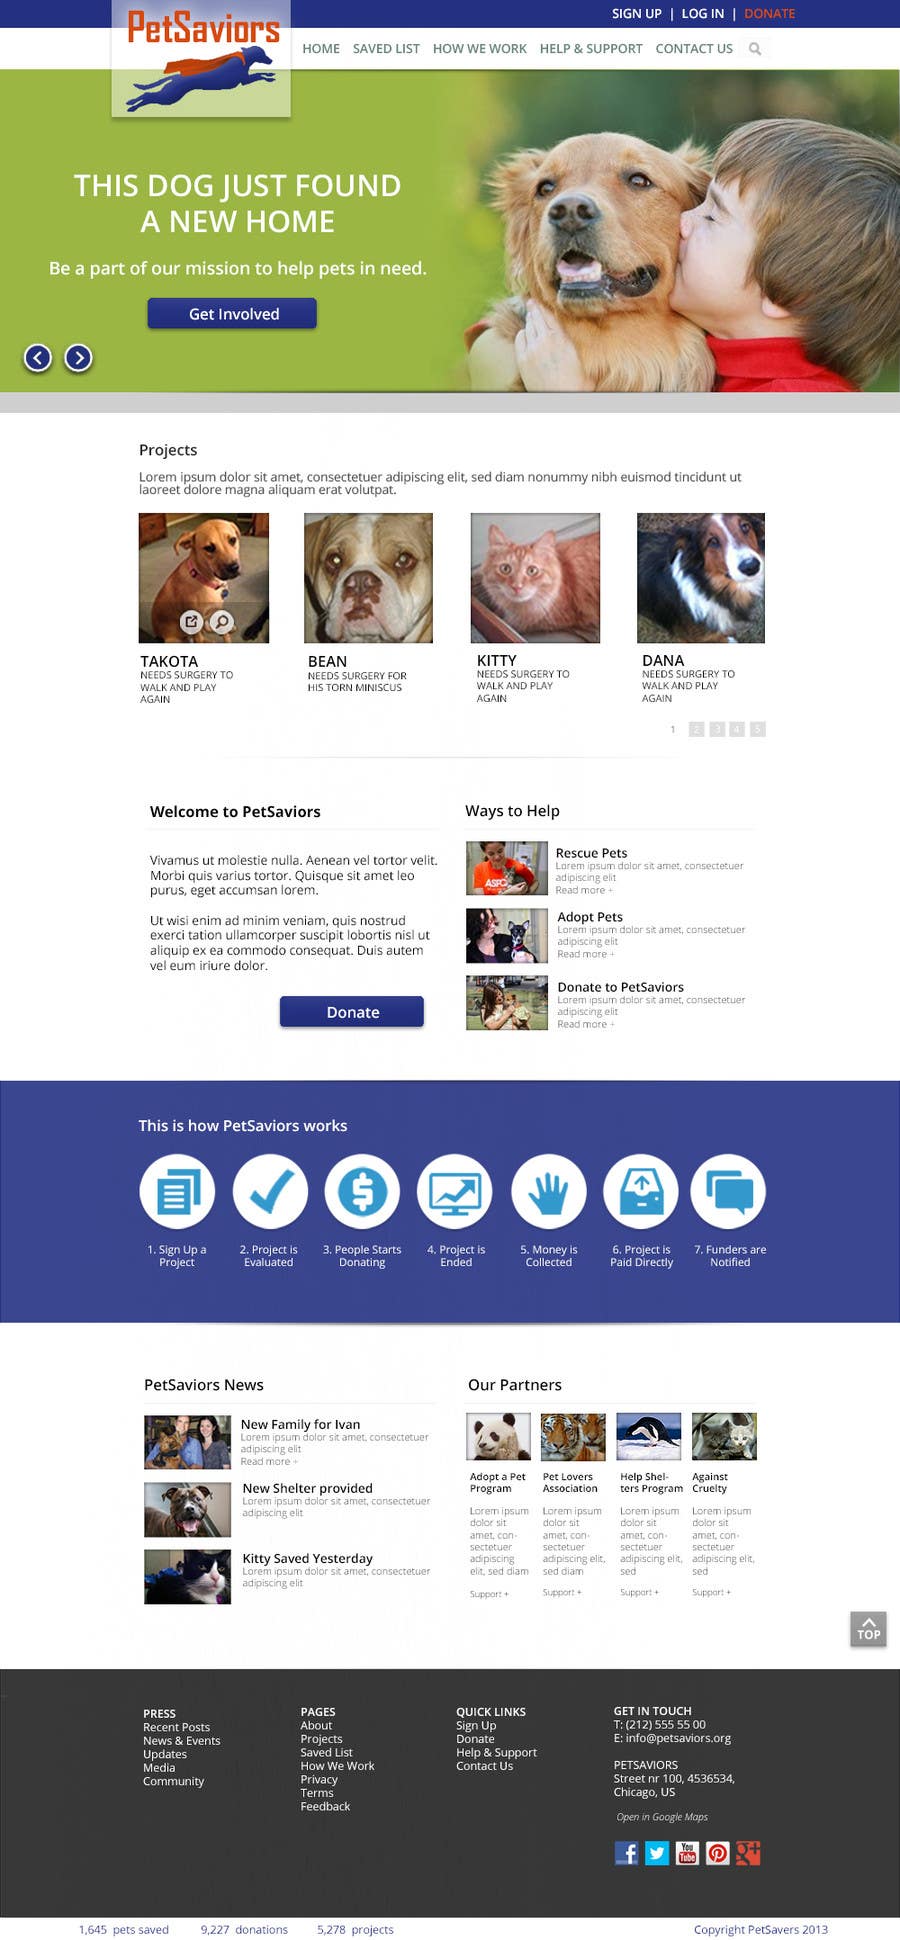 Proposition n°35 du concours                                                 Design an awesome Website mock-up for PetSaviors
                                            